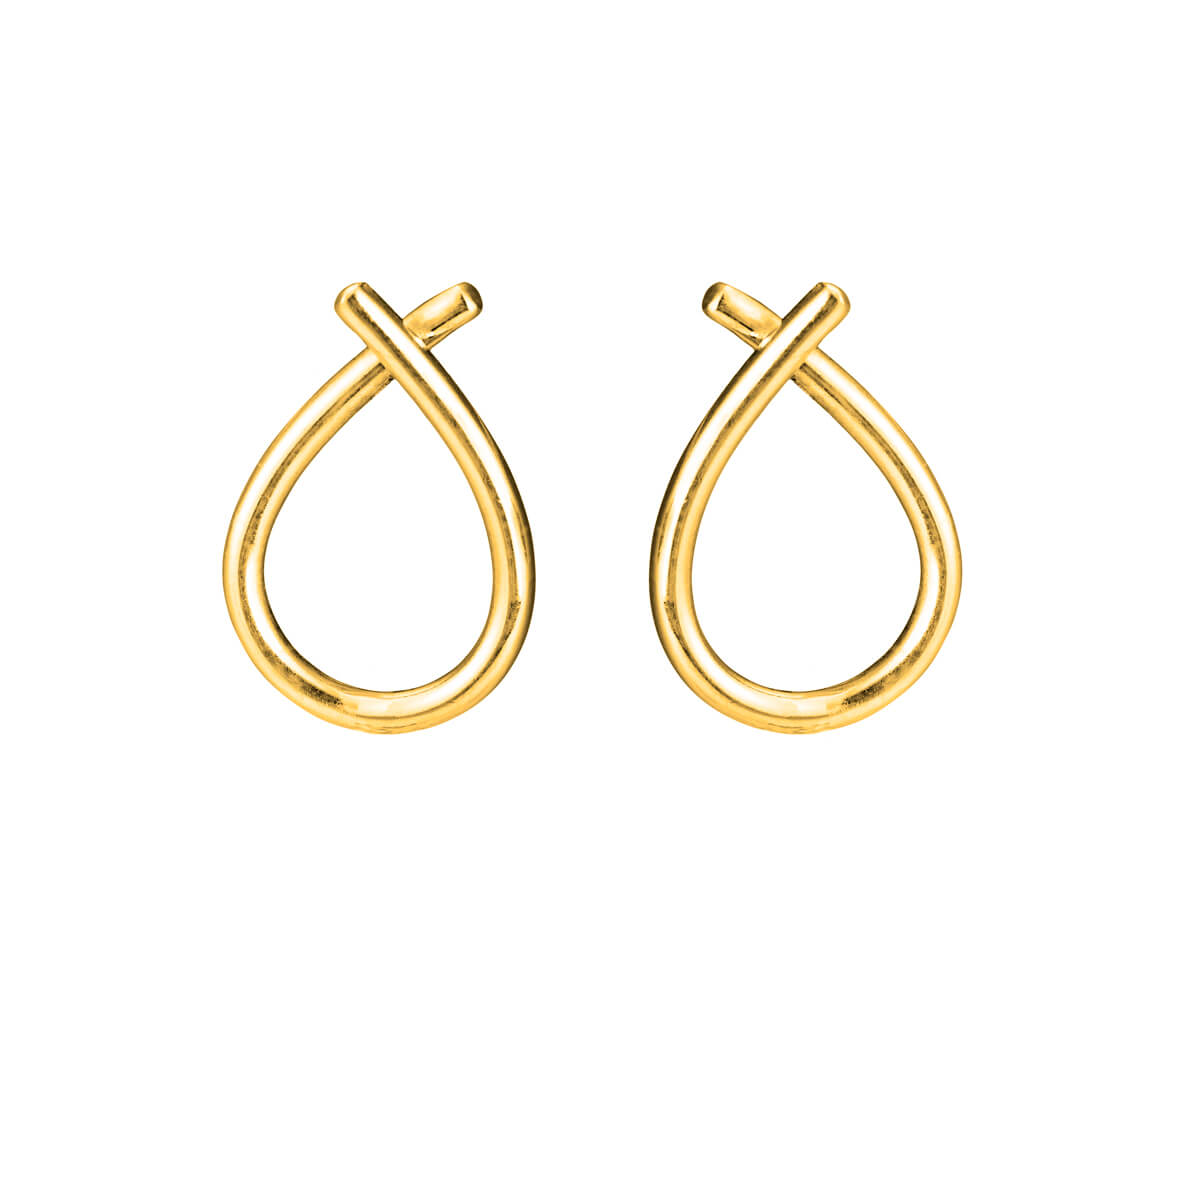 Small cross earrings in polished gold plated silver / 5359-21Susanne ...